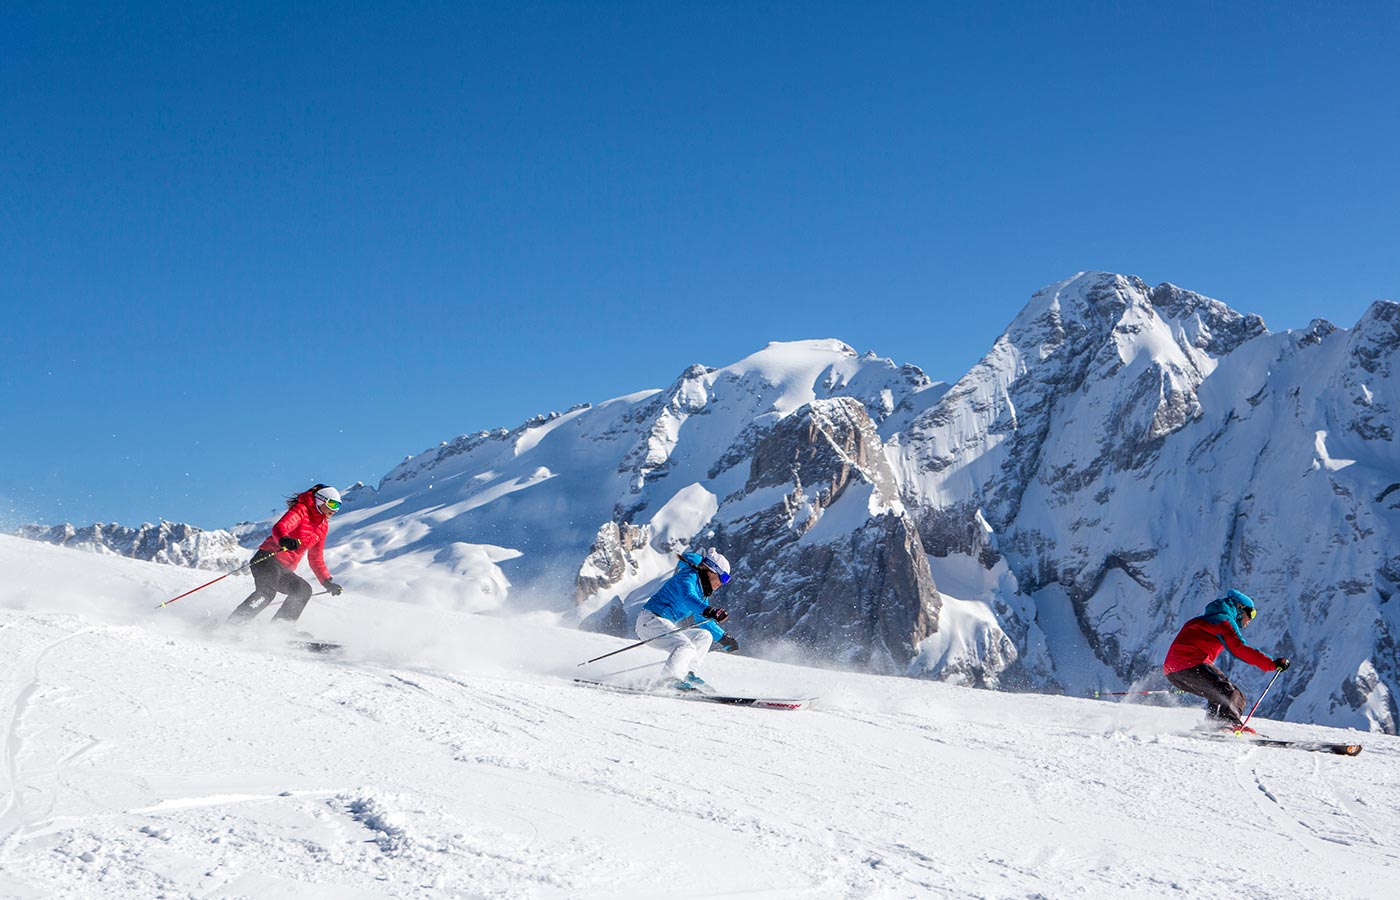 Three skiers start the descent from the mountain